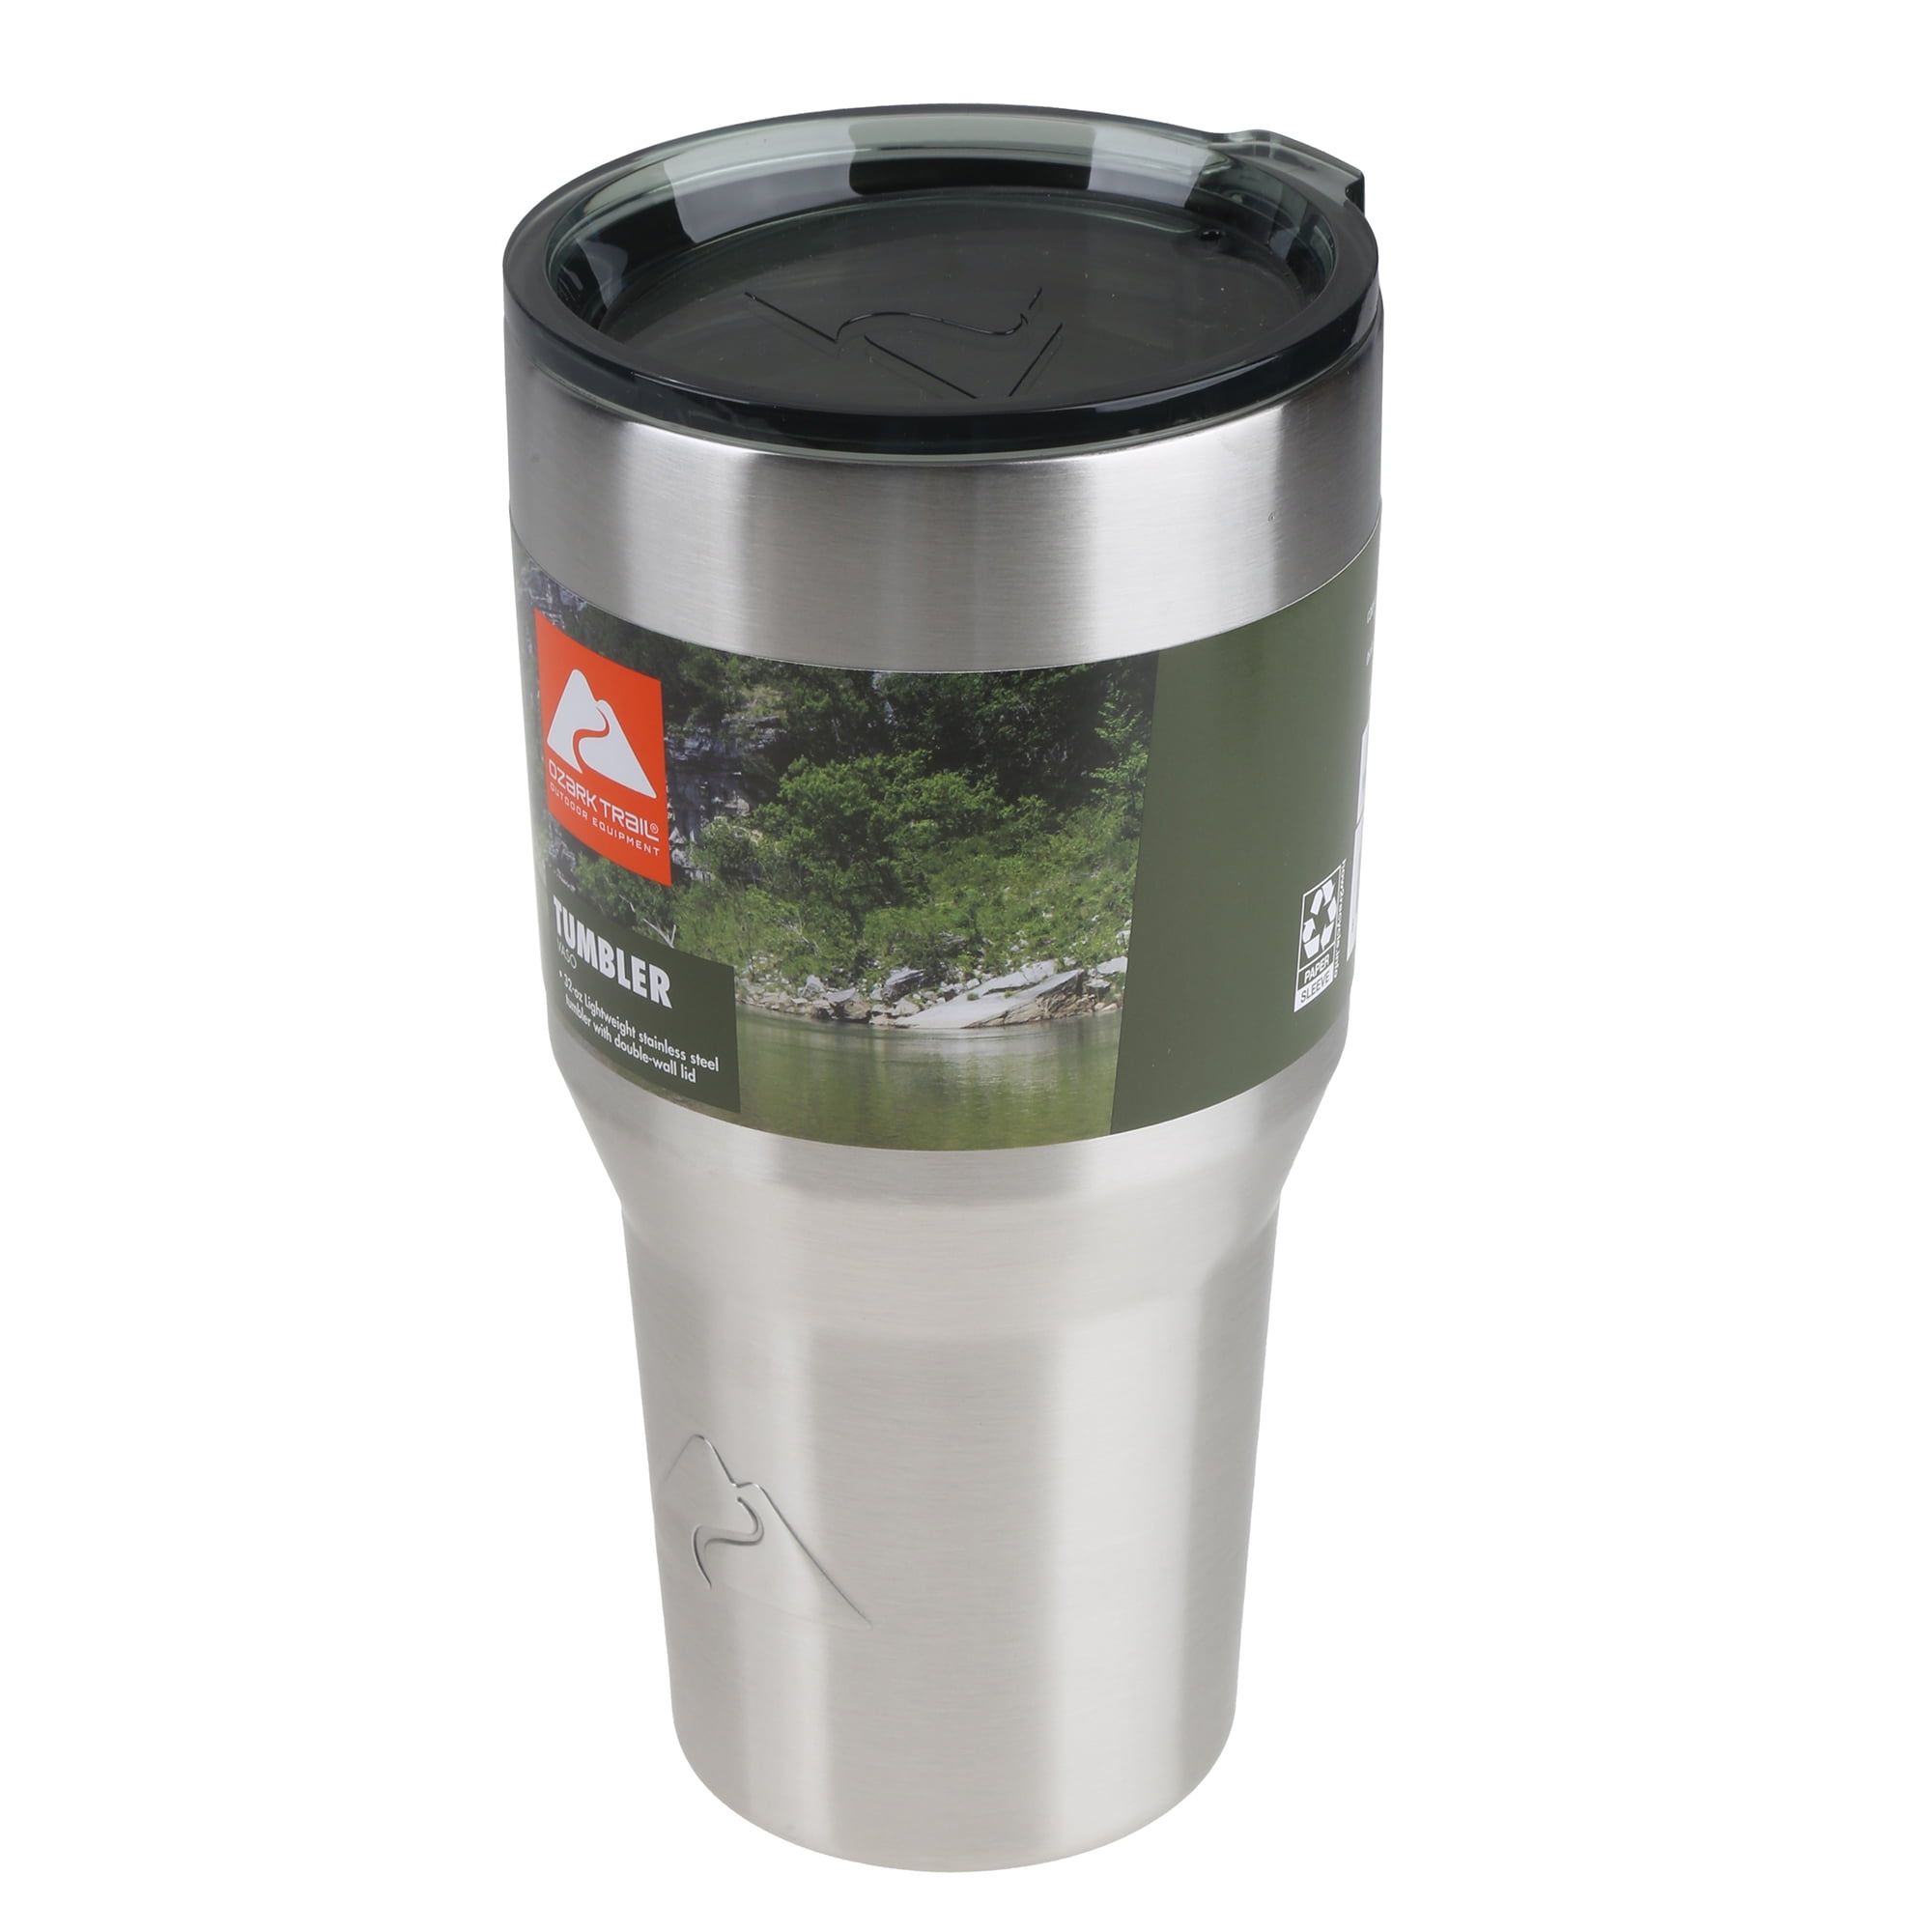 Complete Home Double Wall Stainless Steel Tumbler Black